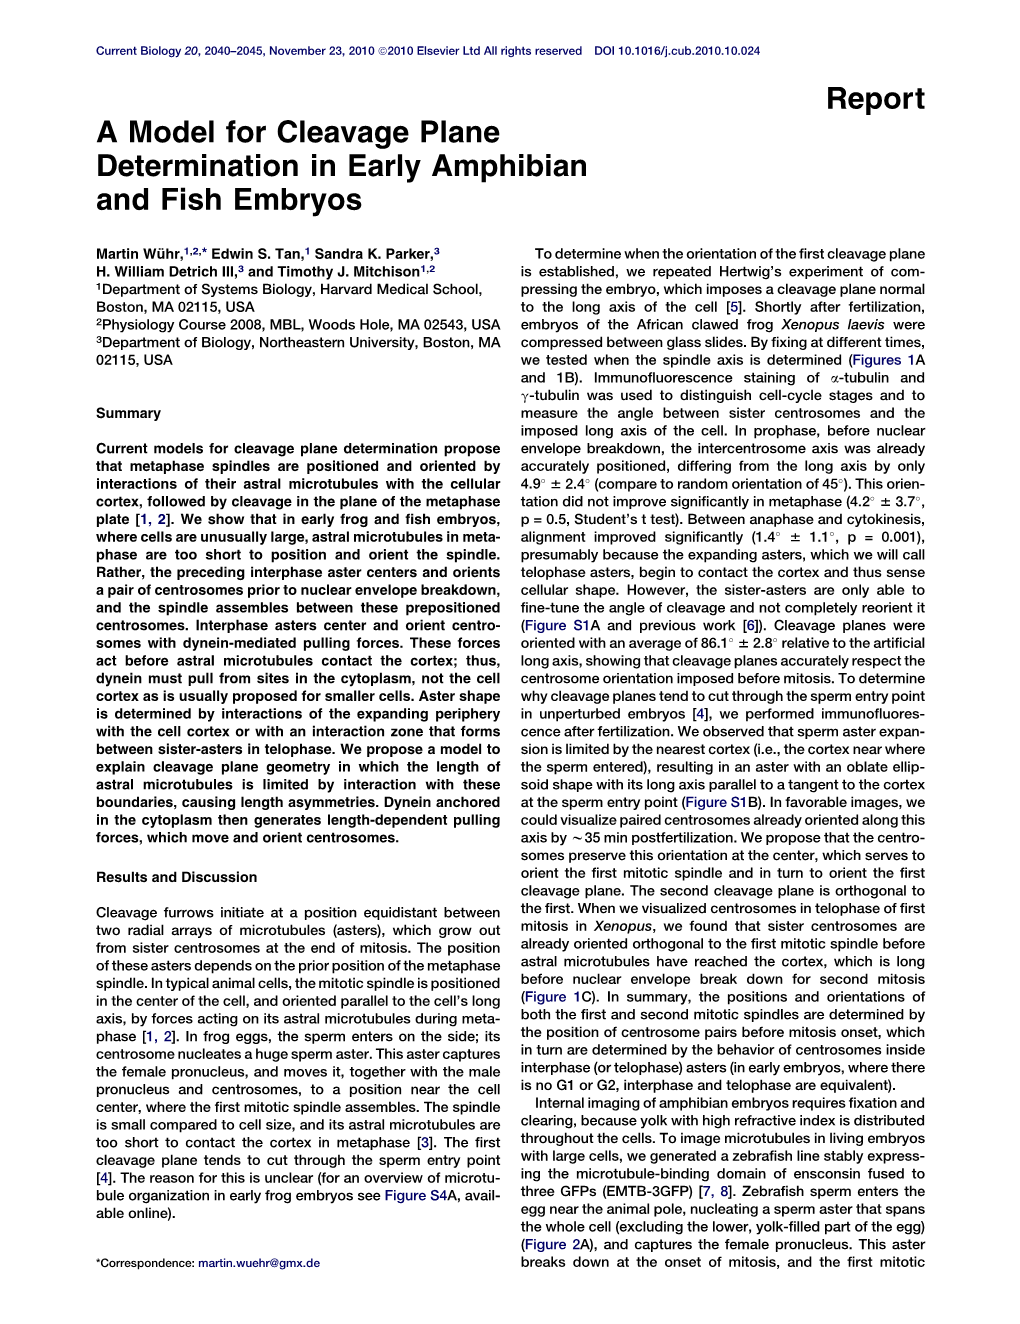 A Model for Cleavage Plane Determination in Early Amphibian and Fish Embryos